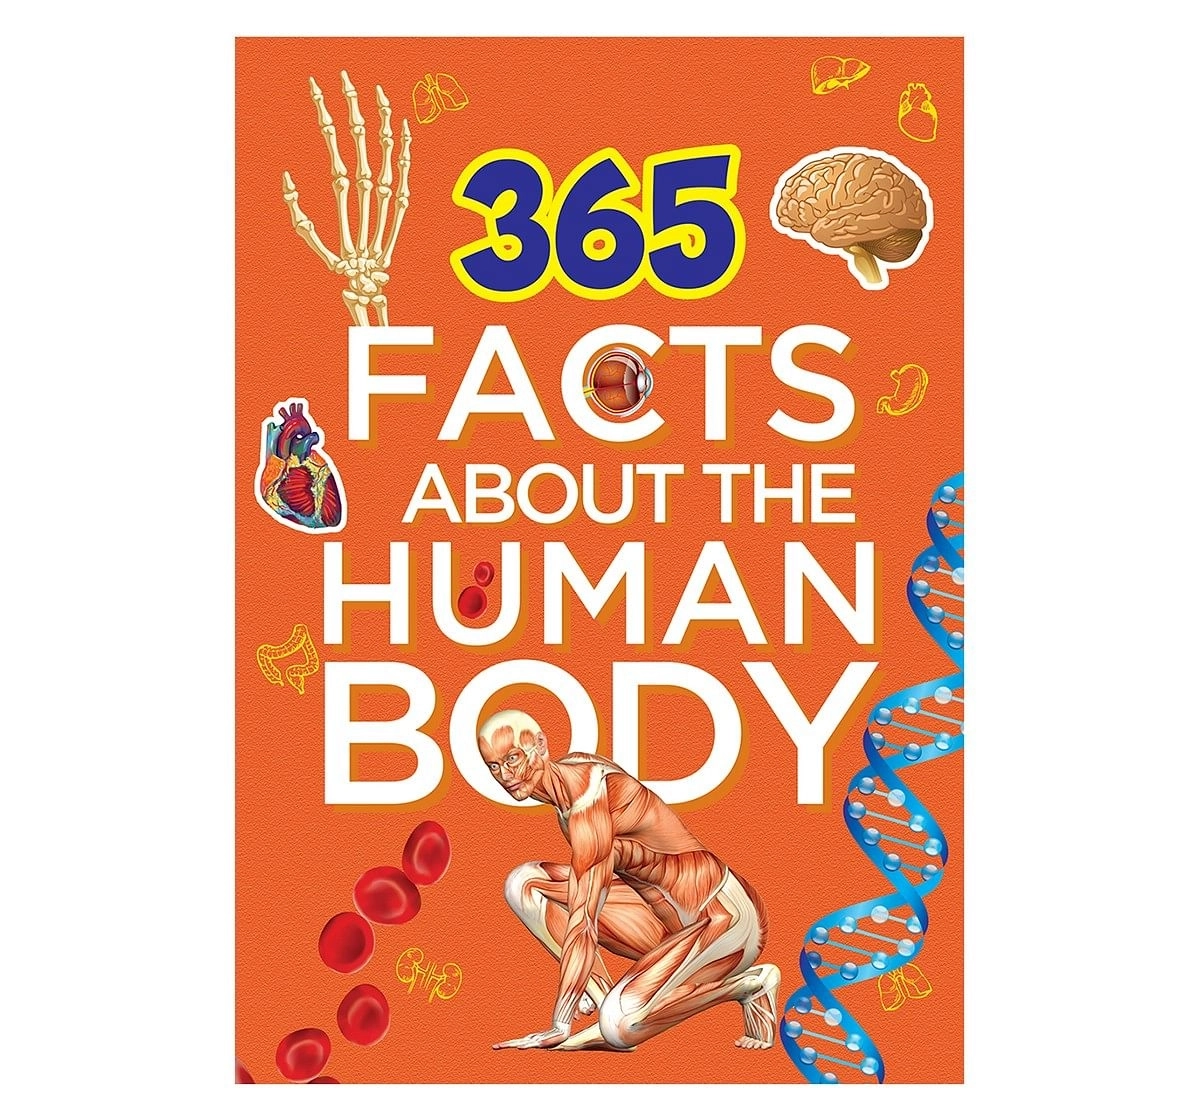 Om Books: 365 Facts About the Human Body, 236 Pages, Hardcover